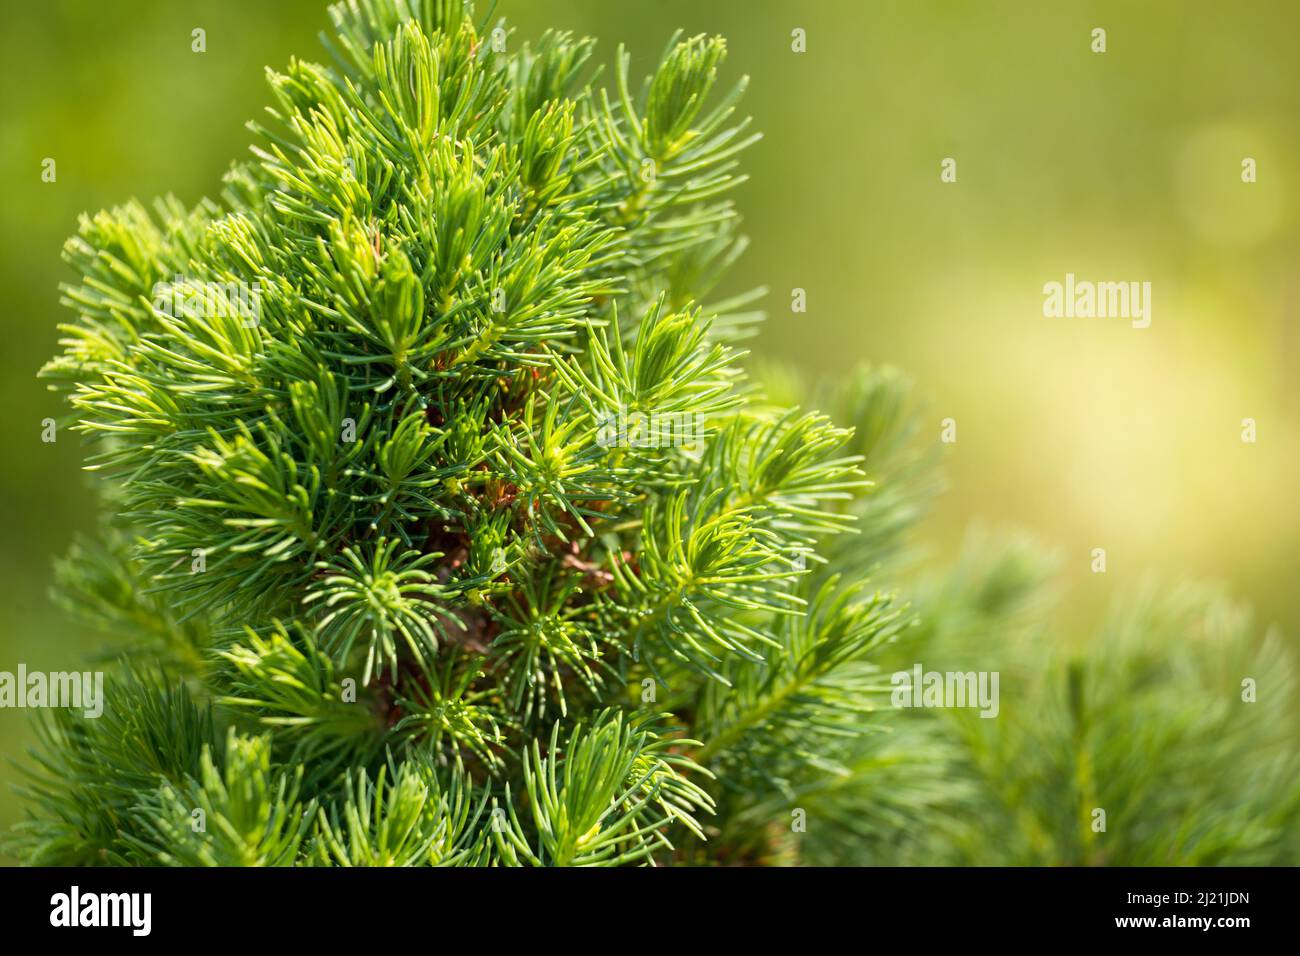 Dwarf ornamental spruce Conica (Picea glauca or white spruce). Branches with beautiful soft needles close-up Stock Photo